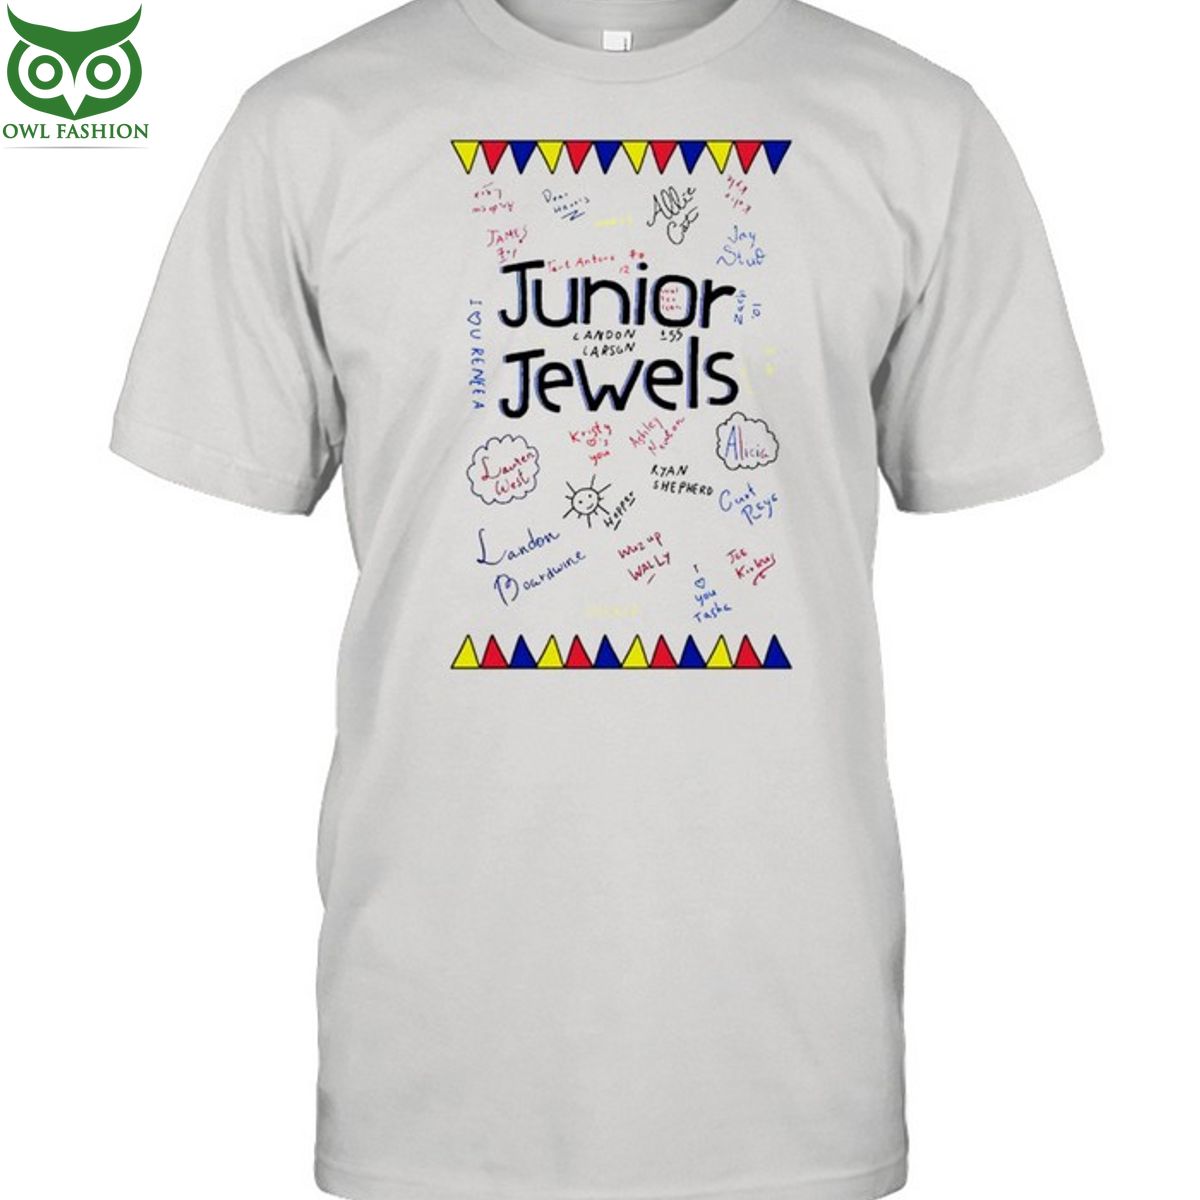 Junior jewels Taylor tshirt I love the artistic expression in this design.